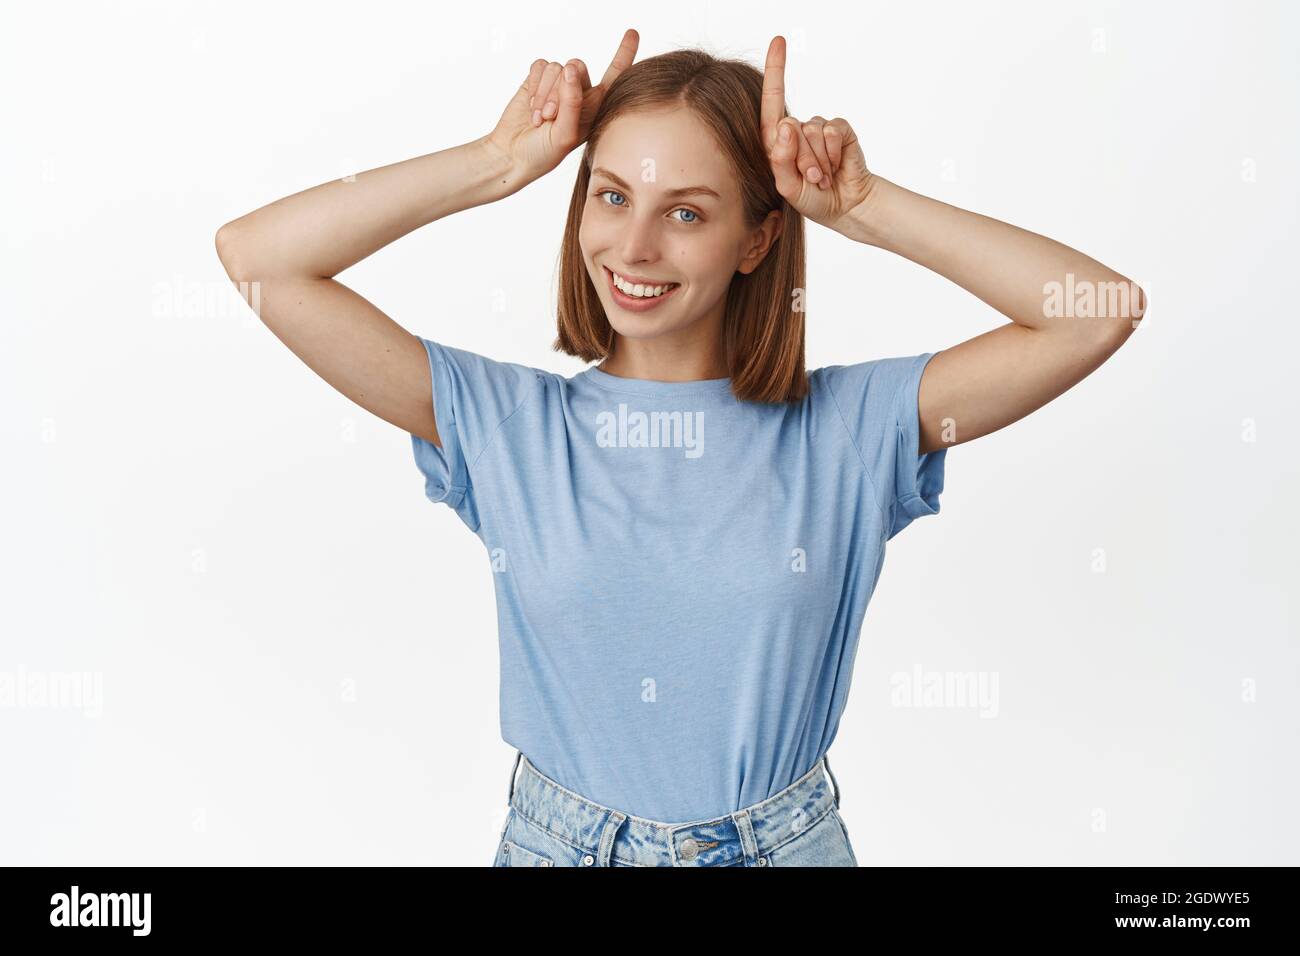 Image of silly and cute young woman having fun, showing bull horns gesture on head and smiling happy, being playful, standing in t-shirt against white Stock Photo